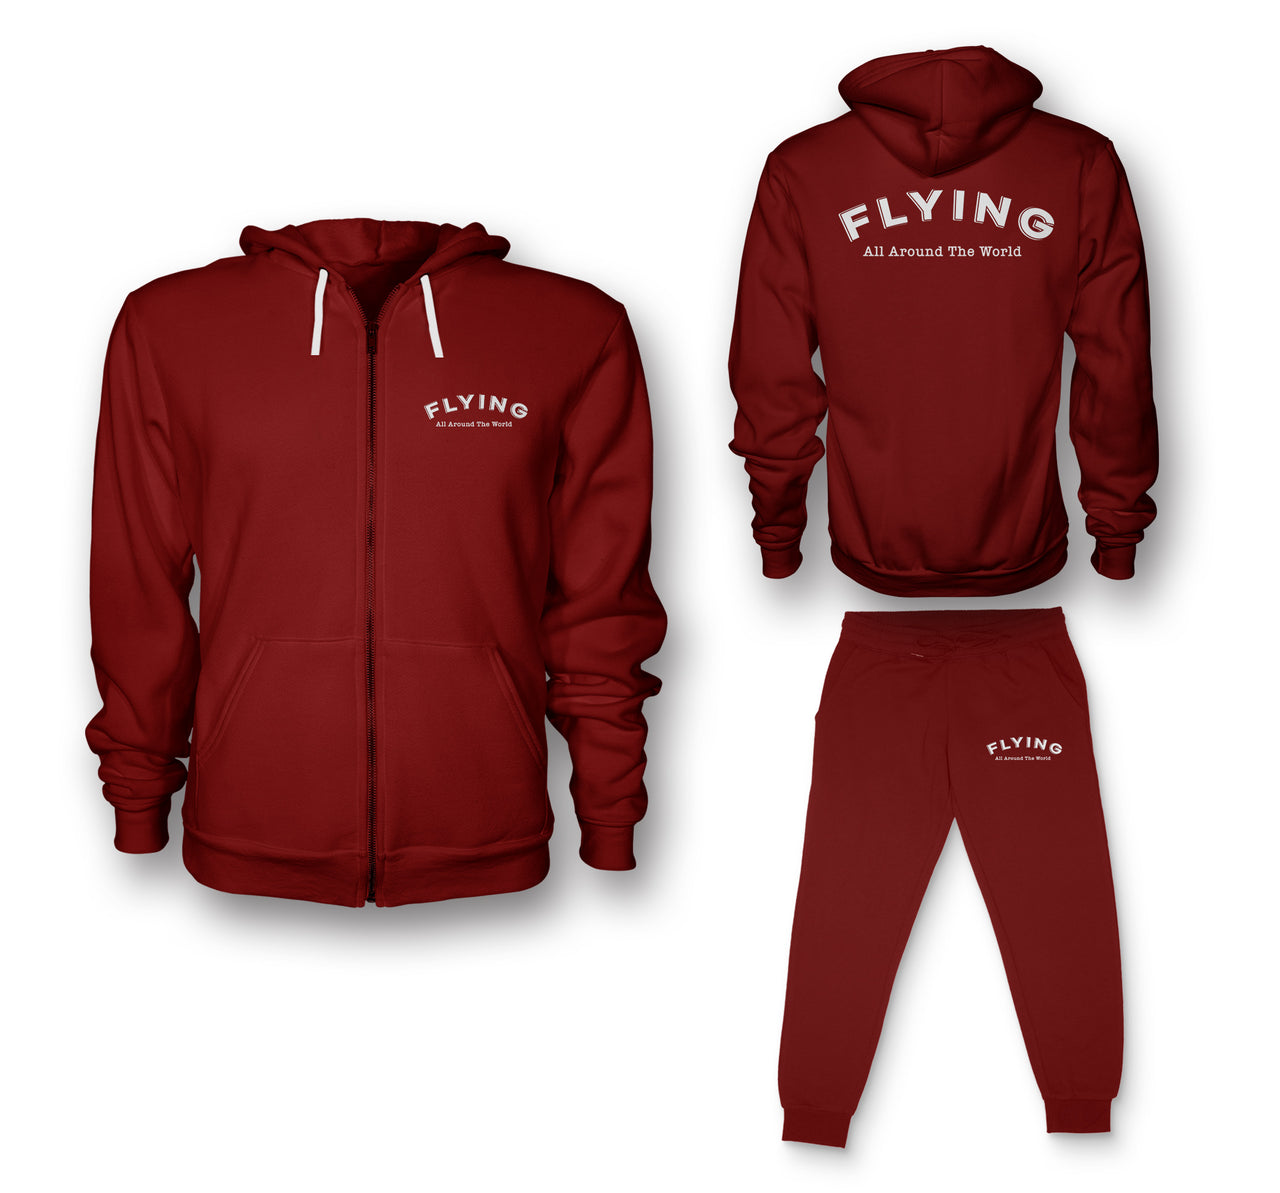 Flying All Around The World Designed Zipped Hoodies & Sweatpants Set